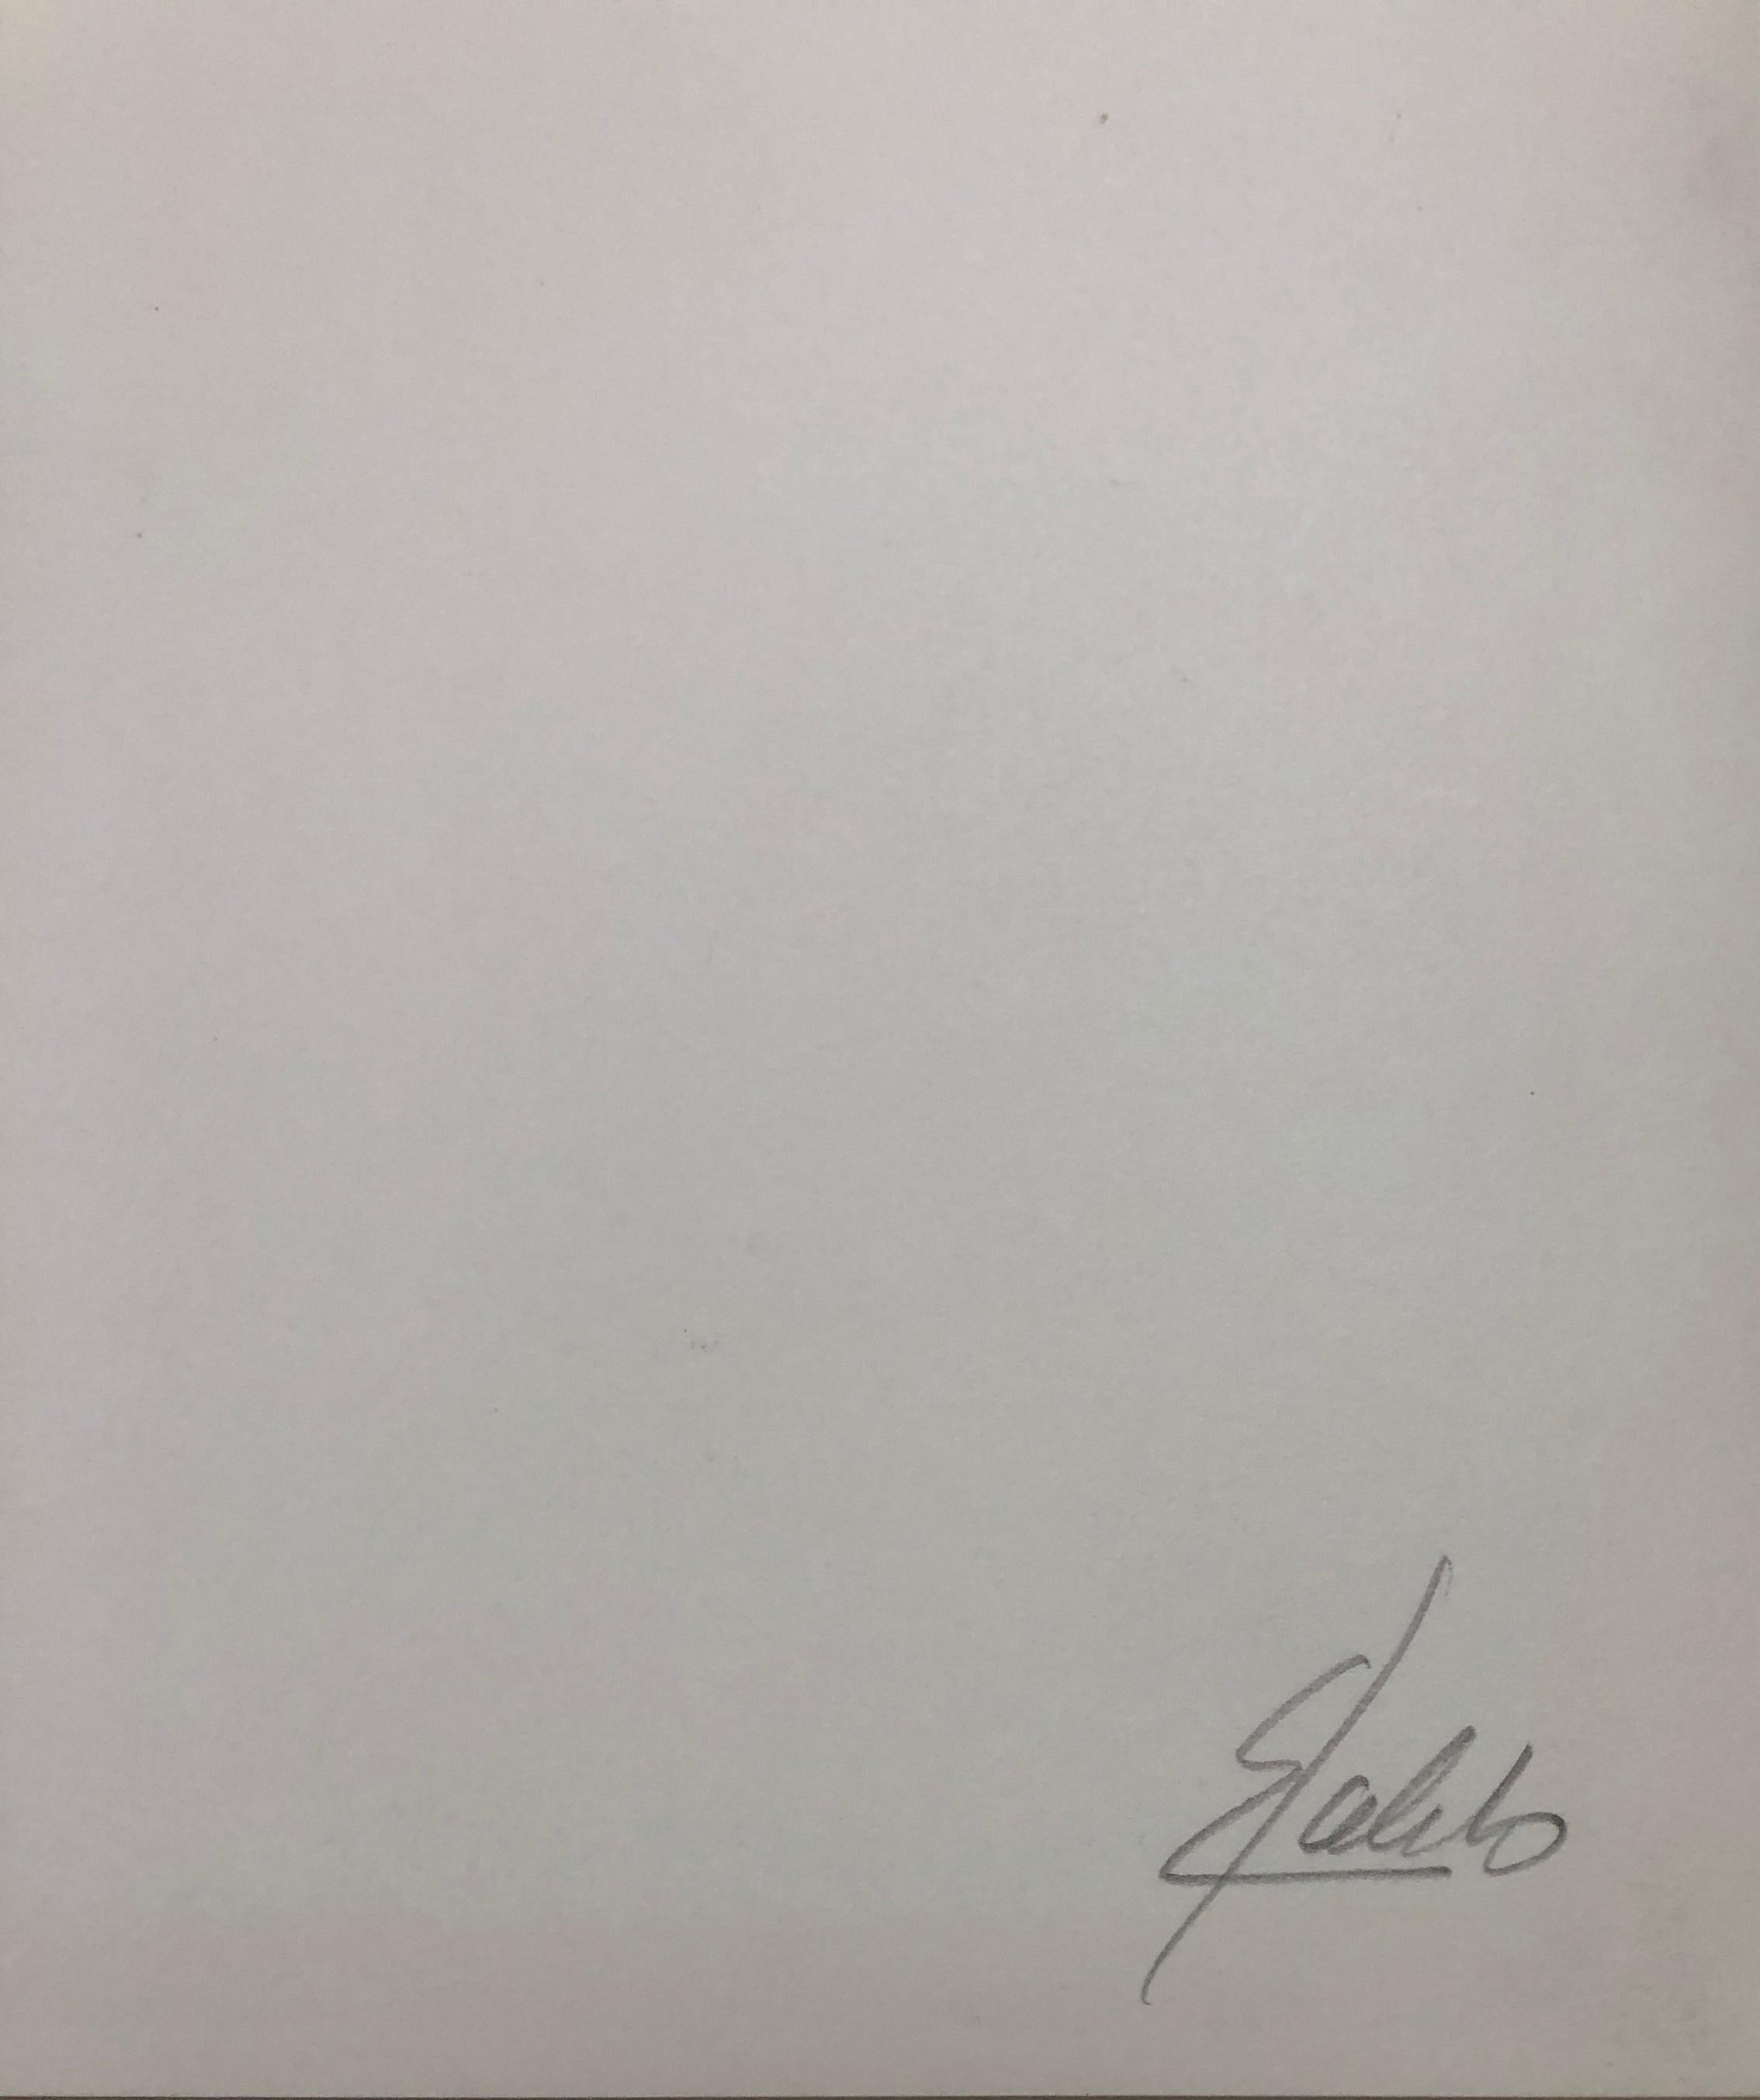 This piece is an original silver gelatin print of Frida Kahlo taken by Antonio Kahlo circa 1940. It is hand signed in pencil on verso by Antonio who was Frida's nephew. The image measures 13 x 9.25 inches, the sheet measures 14 x 10.75 inches and